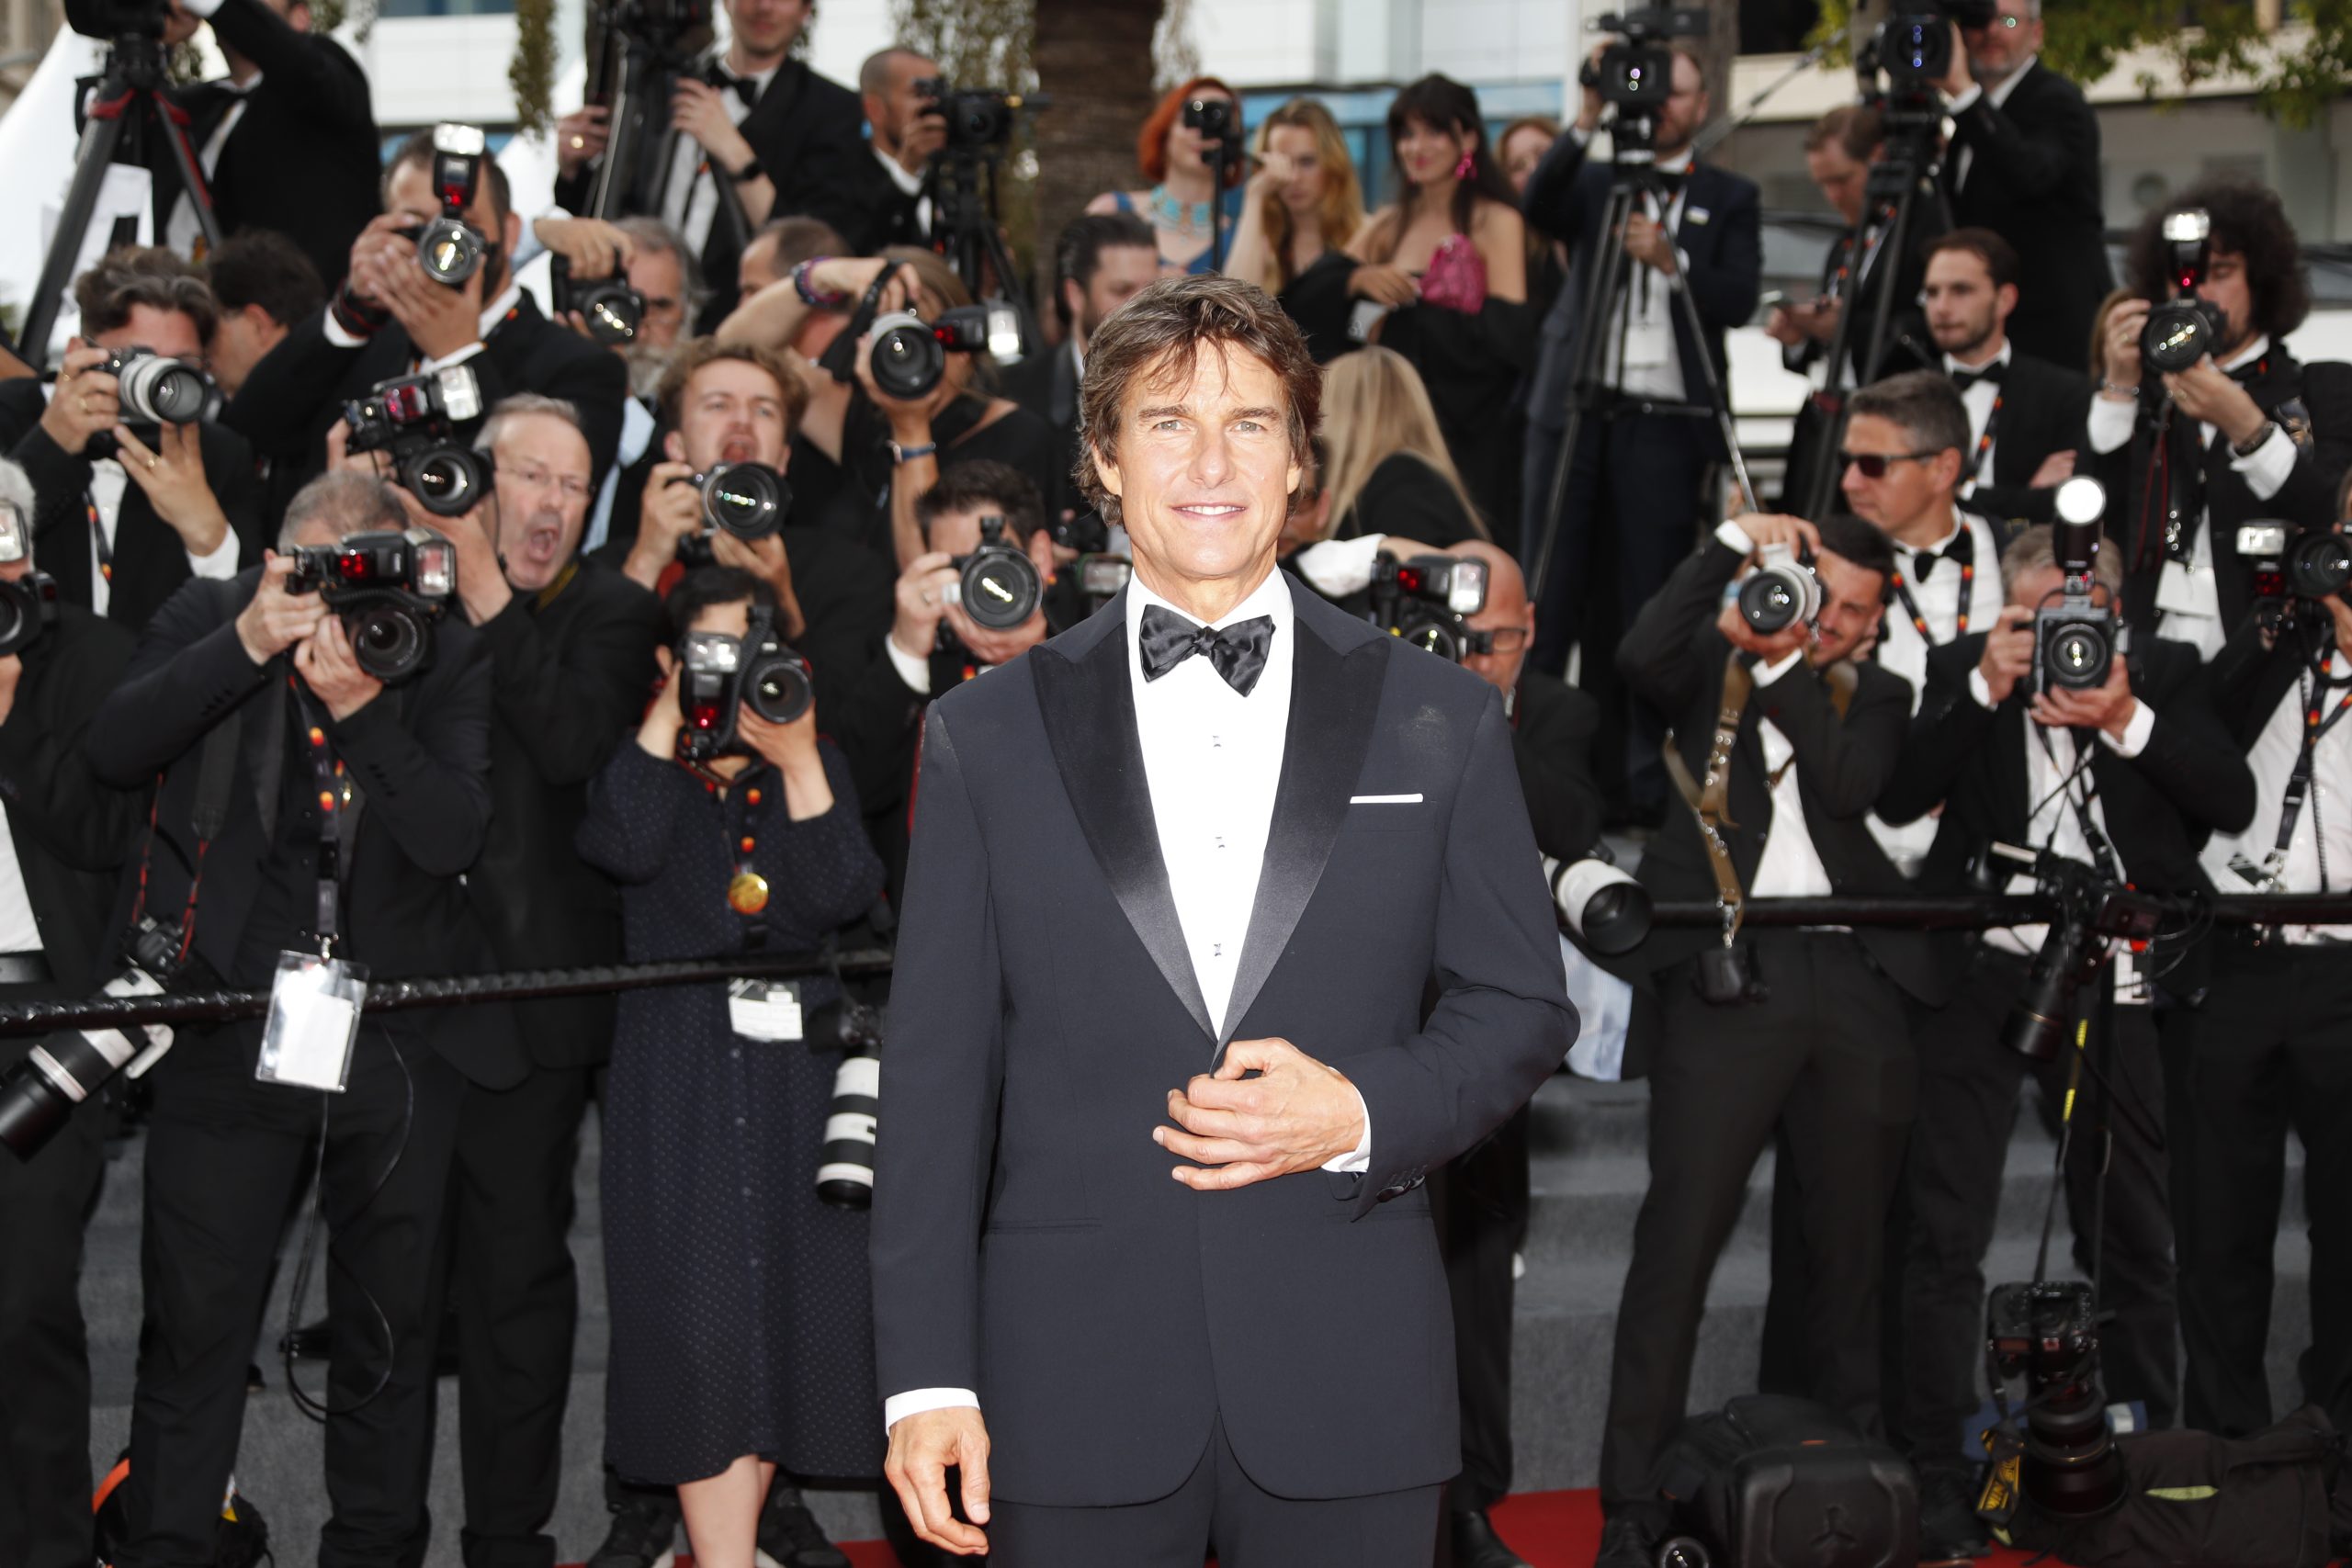 epaselect epa09955797 US actor Tom Cruise arrives for the screening of 'Top Gun: Maverick' during the 75th annual Cannes Film Festival, in Cannes, France, 18 May 2022. The movie is presented out of competition of the festival which runs from 17 to 28 May.  EPA/SEBASTIEN NOGIER